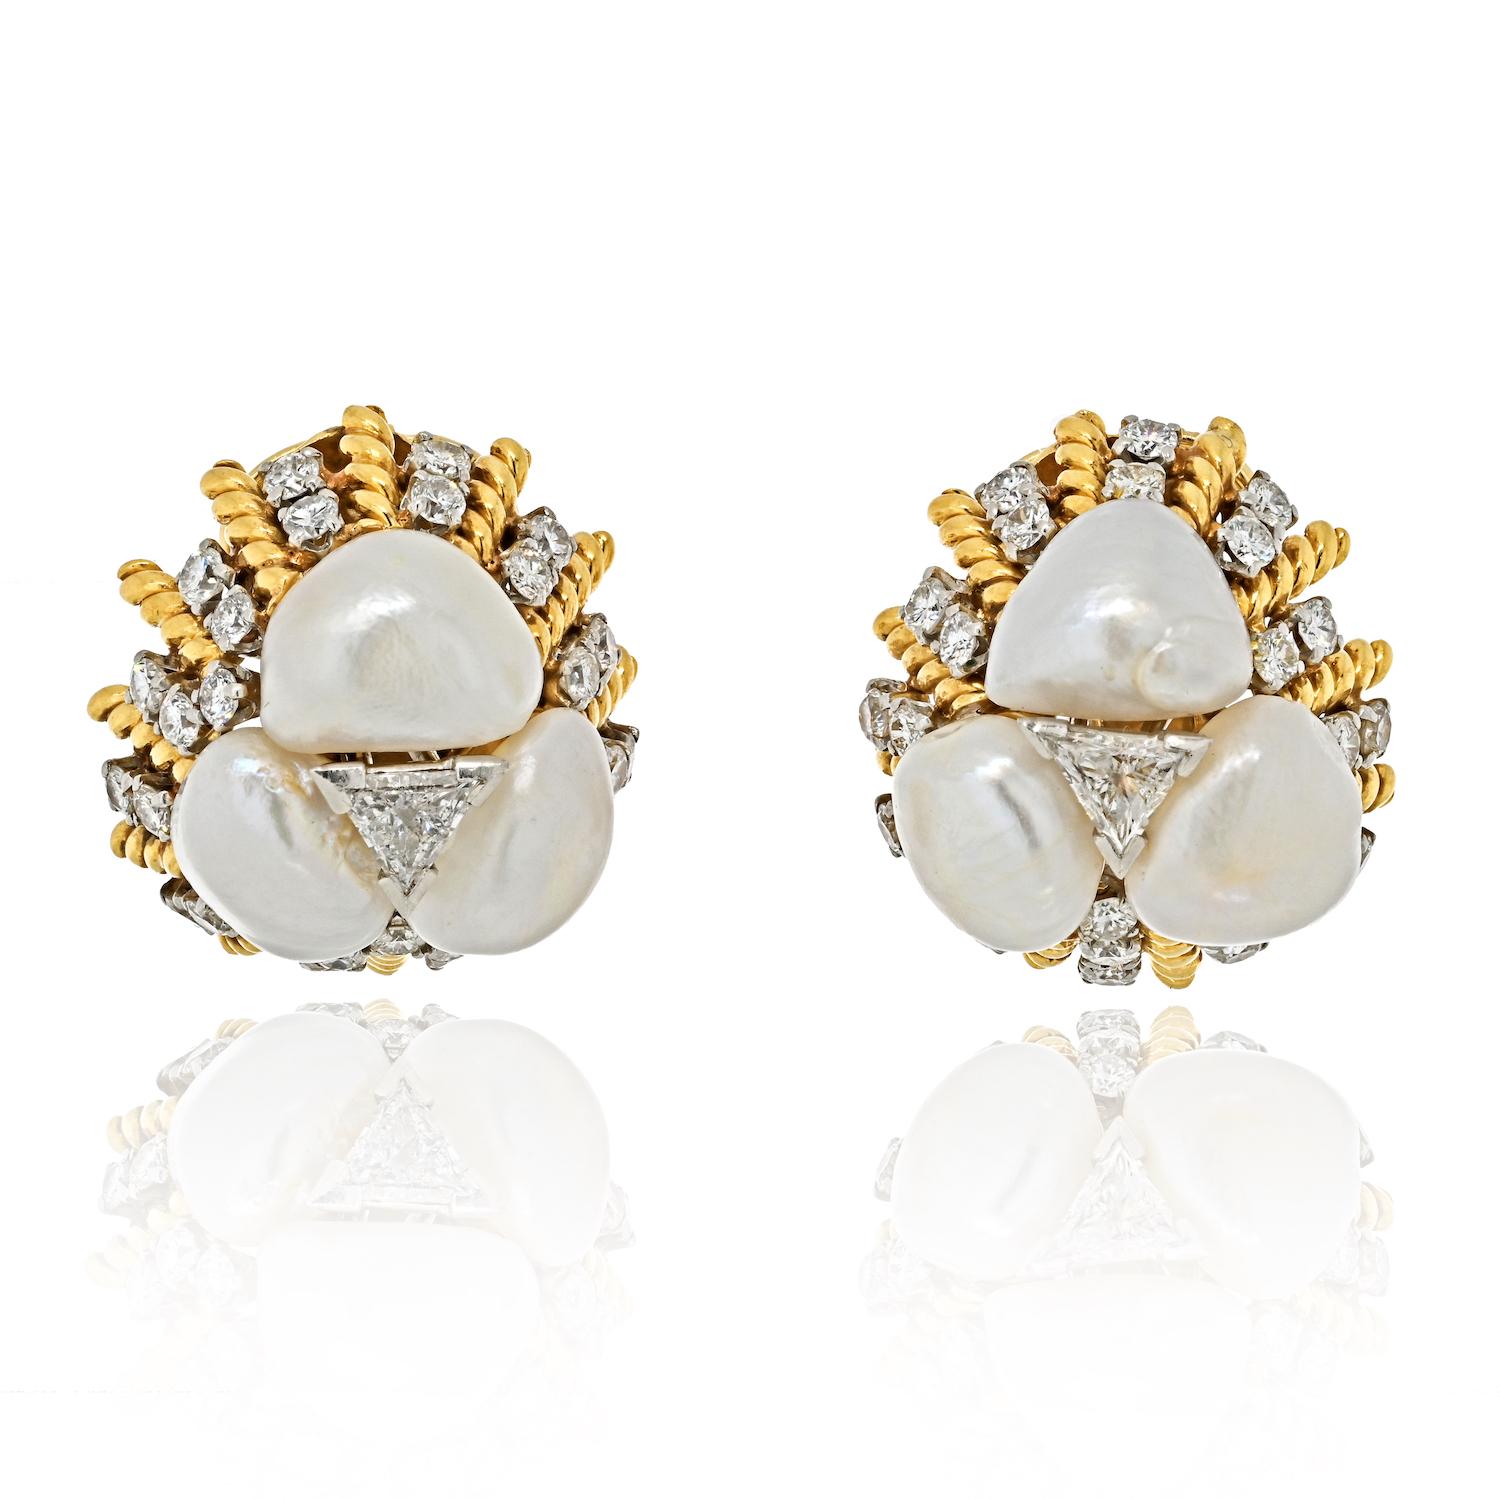 The David Webb Platinum & 18K Yellow Gold Diamond, Pearl, Dome Style Clip On Earrings are a stunning example of the luxury and elegance for which the David Webb brand is renowned. These earrings are a true statement piece, featuring a unique and